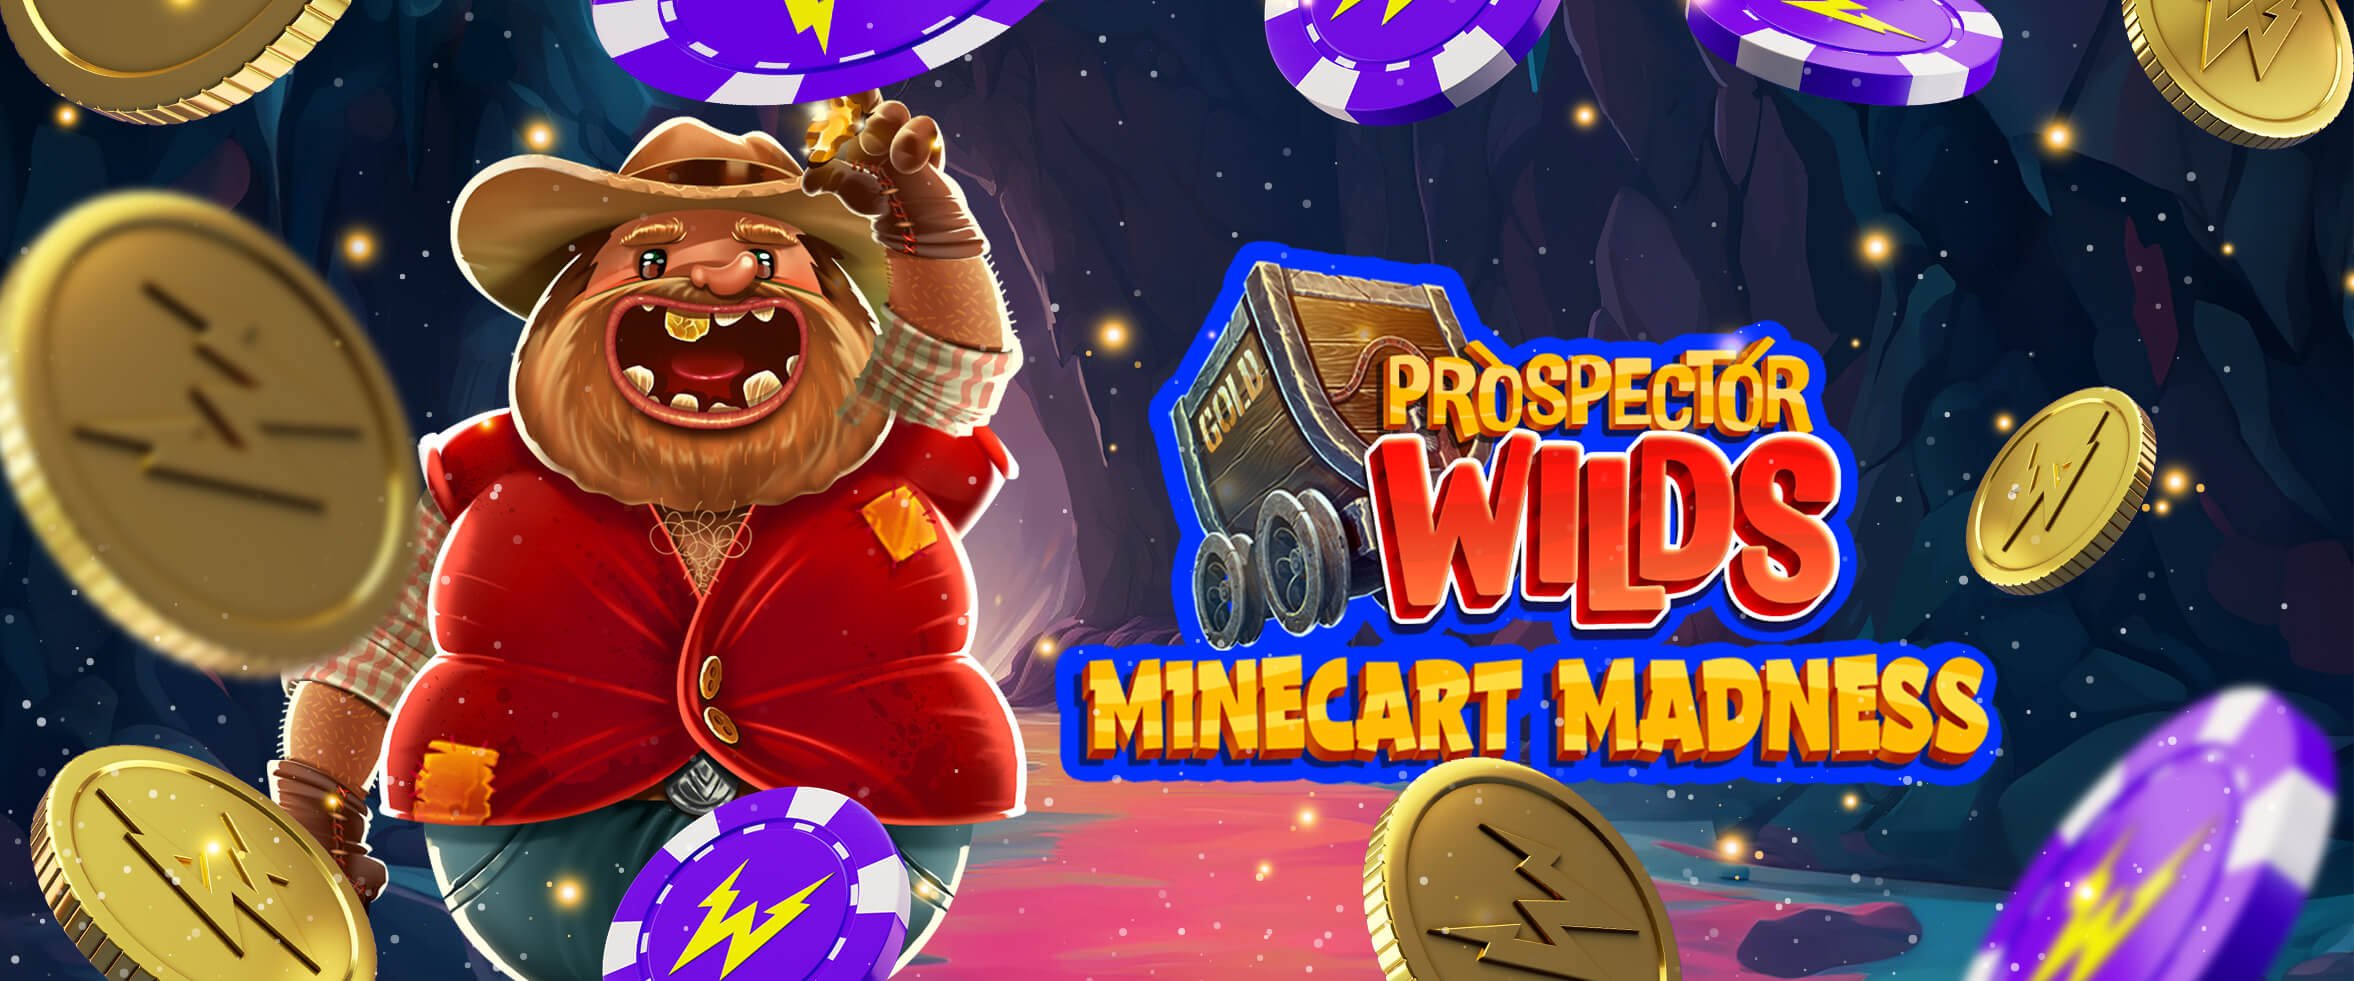 Exclusive New Release: Prospector Wilds Minecart Madness